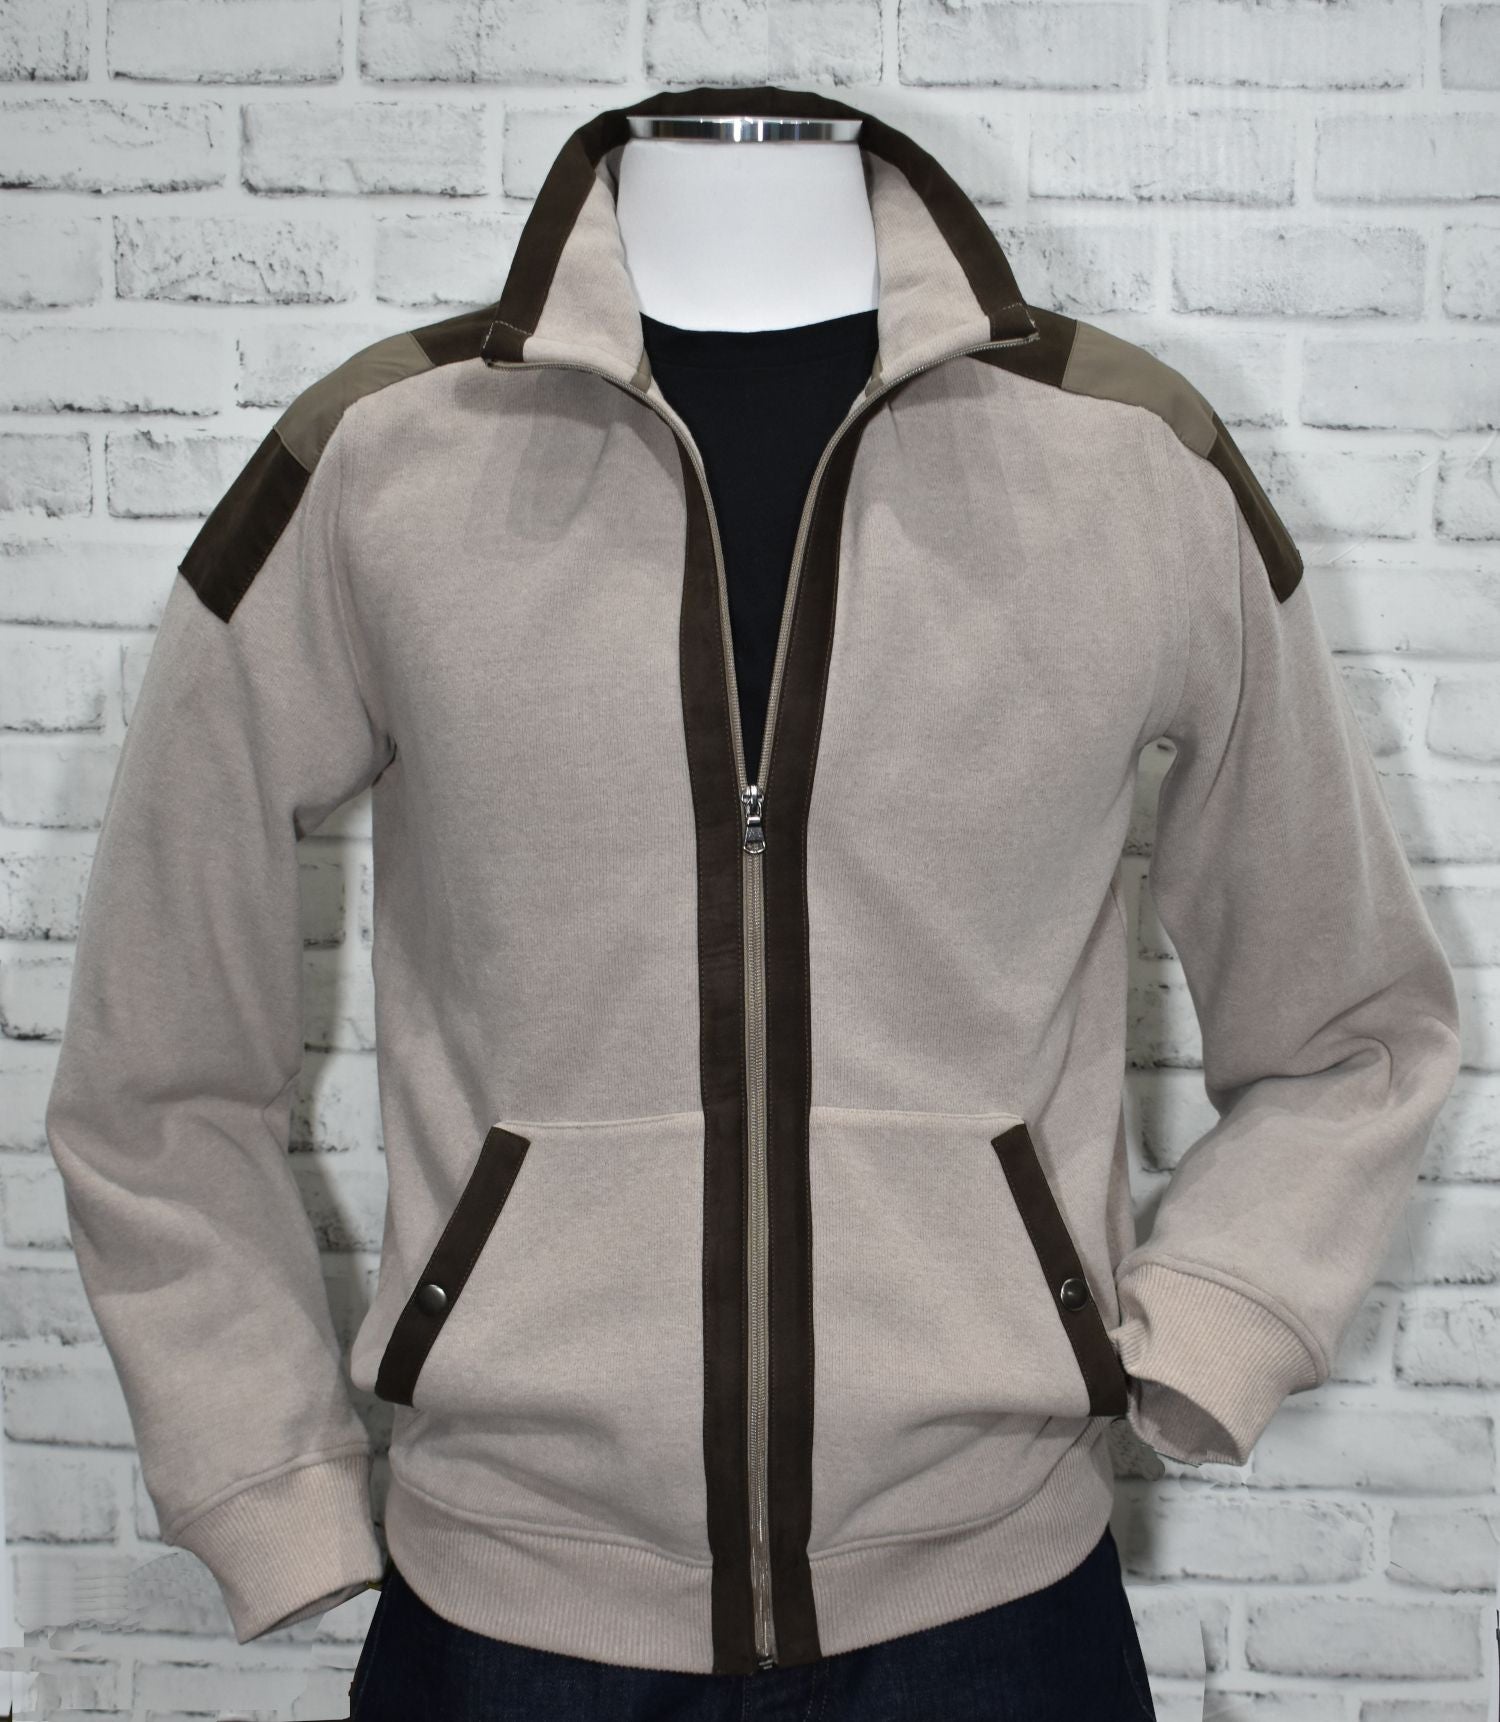 Unmistakably stylish, the Espana Leisure Jacket is crafted from a luxuriously comfortable poly cotton fabric, with a modern fit perfect for a slim to medium build. The jacket is finished off with classic pockets and chocolate and tan alcantara suede trim, for a sleek, sophisticated look. Cool comfort at its finest.